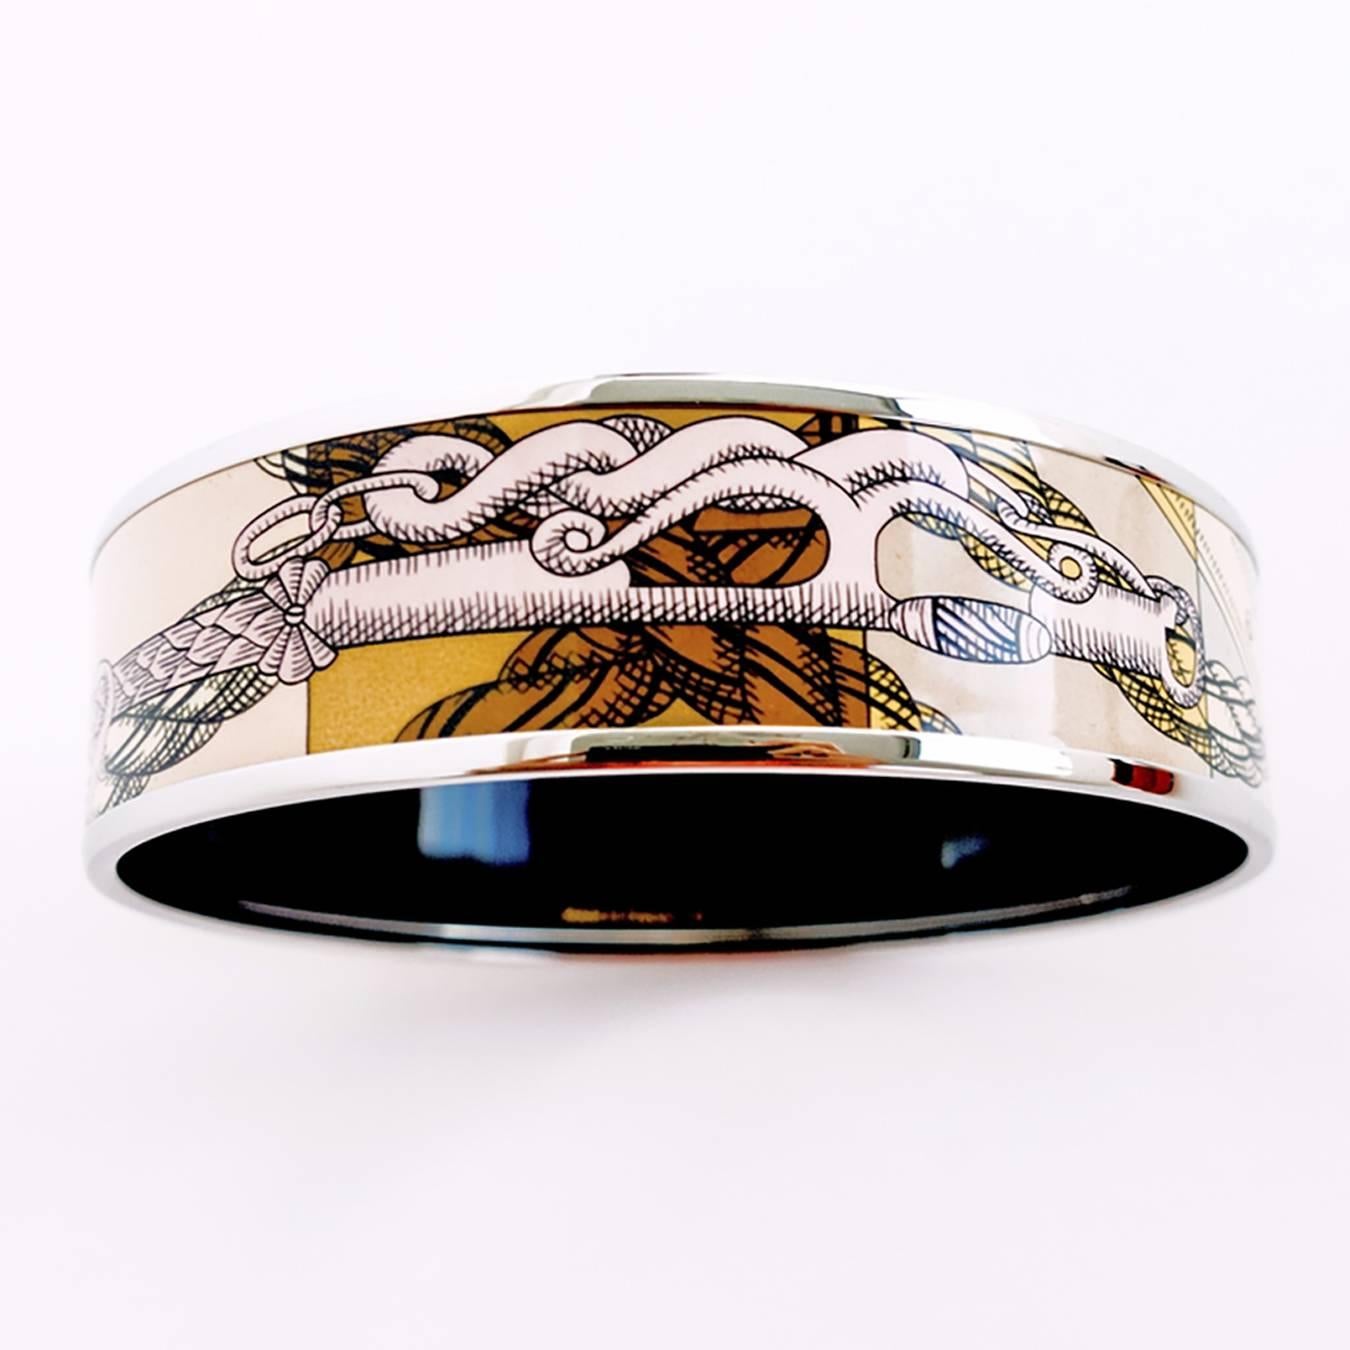 Store fresh.  Pristine condition.
Perfect gift! Comes full set with Hermes velvet sleeper, box, and ribbon.
Fabulous Della Cavalleria printed enamel bracelet.
Gorgeous details designed by Virginie Jamin. 
Trimmed with fresh palladium